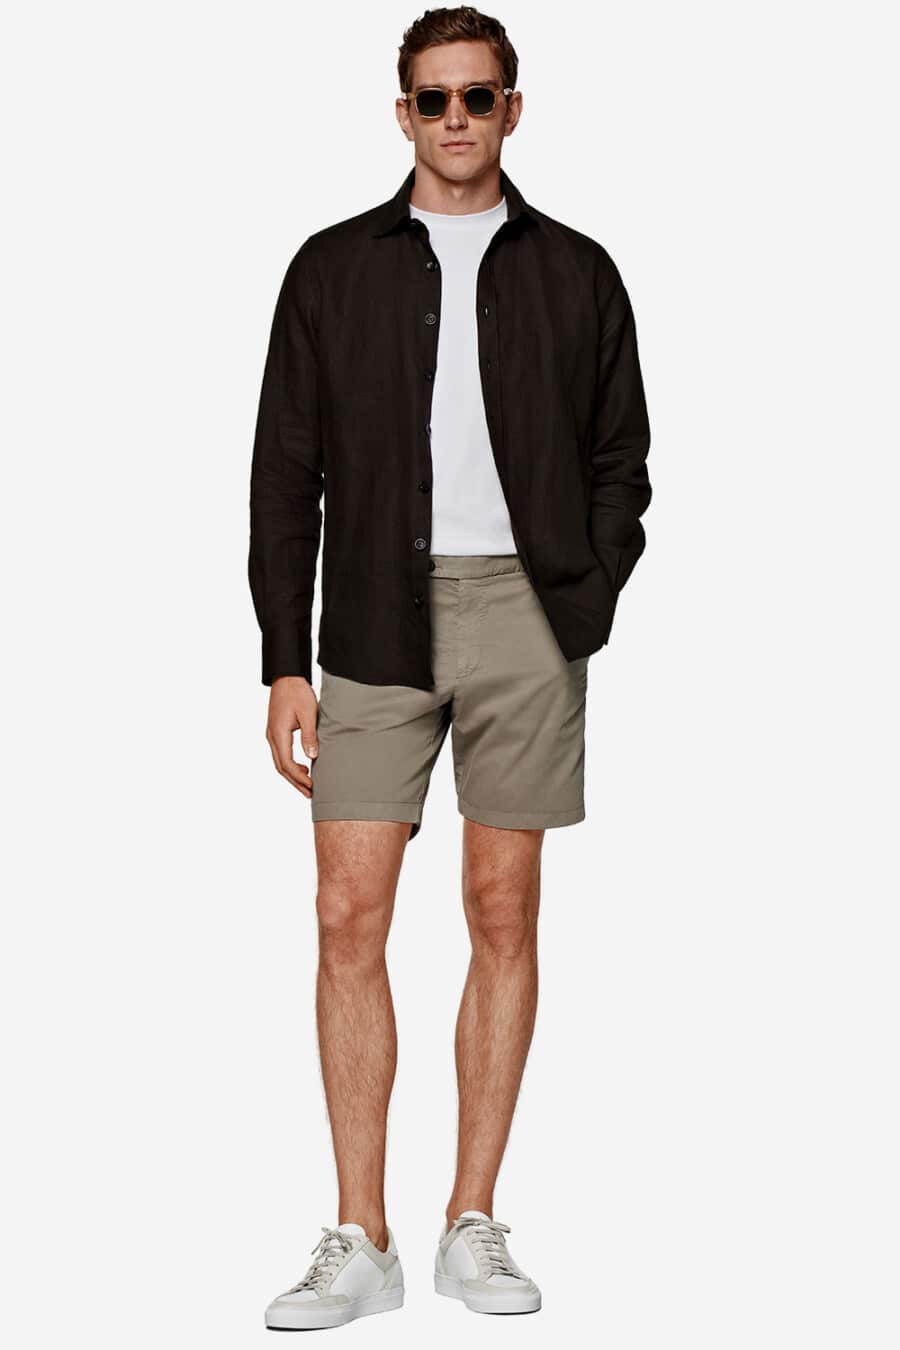 Men's pale green shorts, white T-shirt, open black shirt and white sneakers outfit